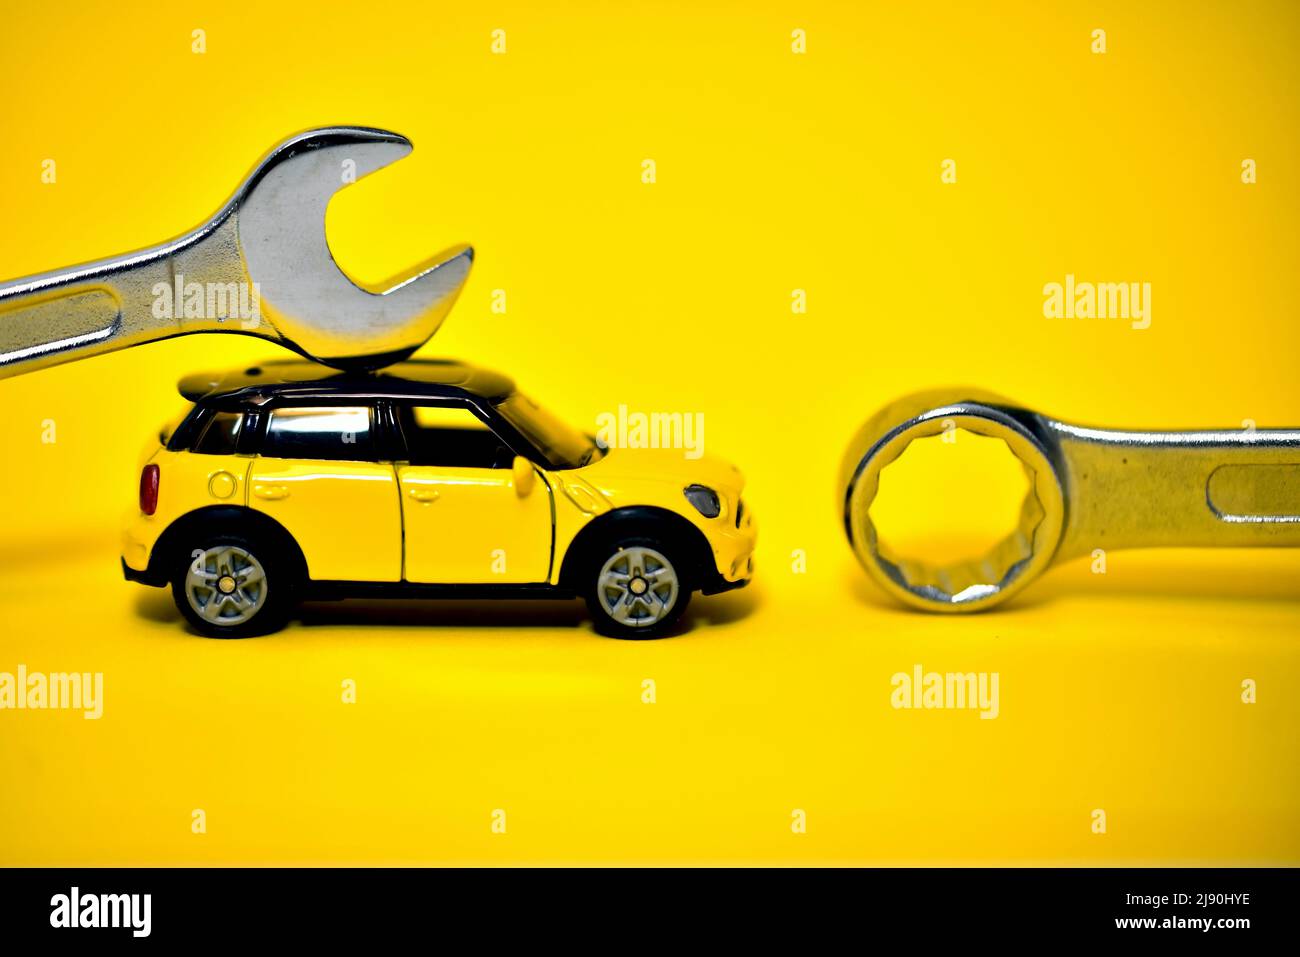 mini cooper toy car with spanner mechanic tools Stock Photo